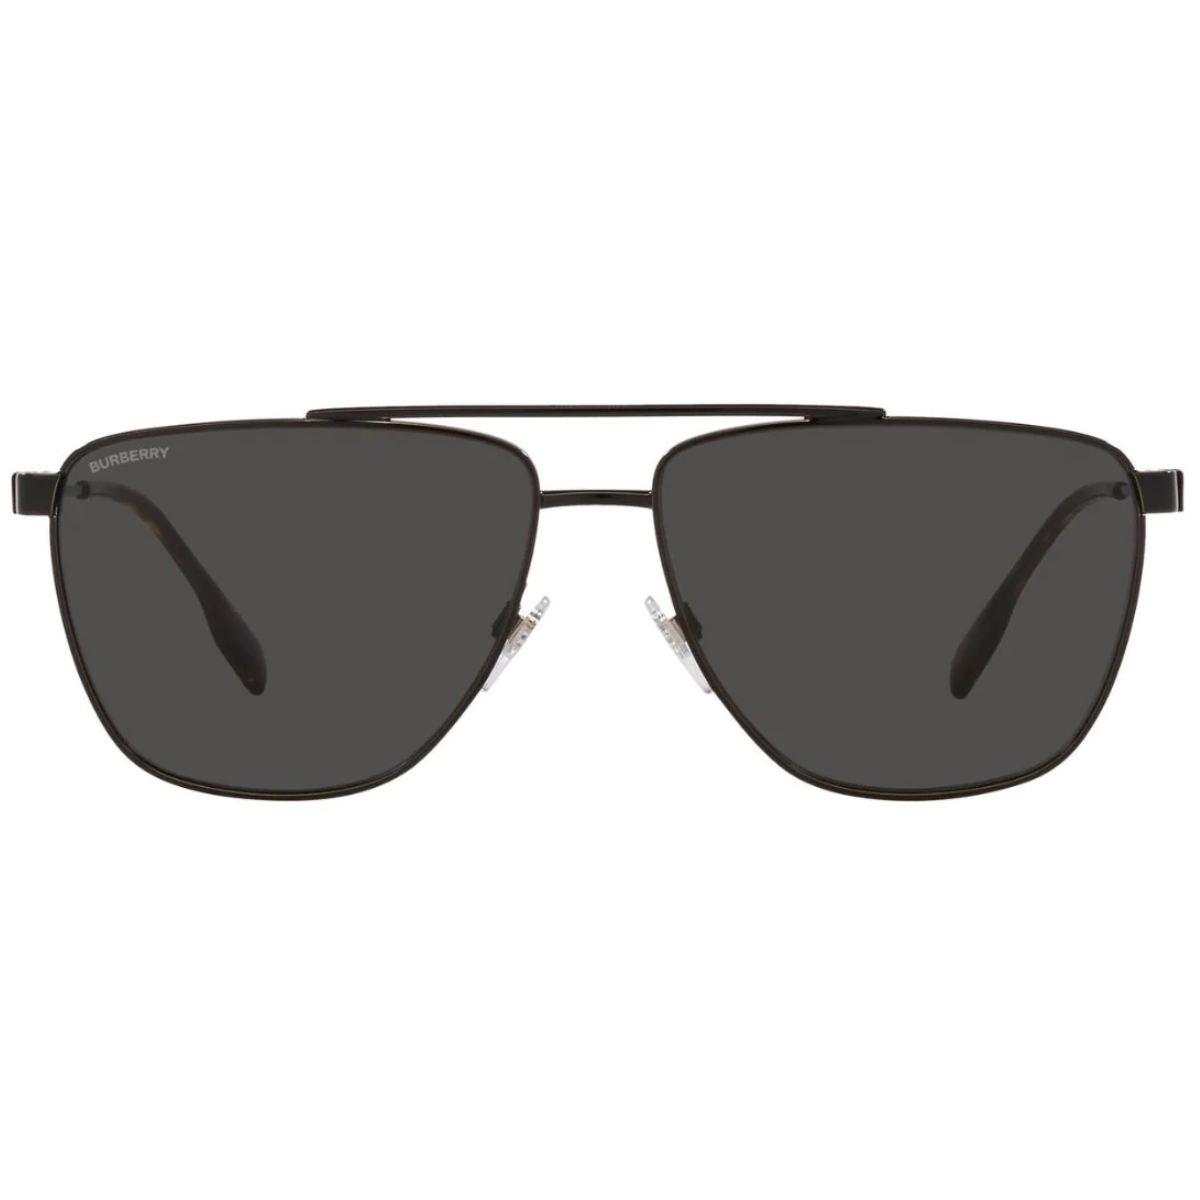 "Discover Burberry 3141 Sunglass for men at Optorium: Elevate your style with cool and stylish shades from top brands."